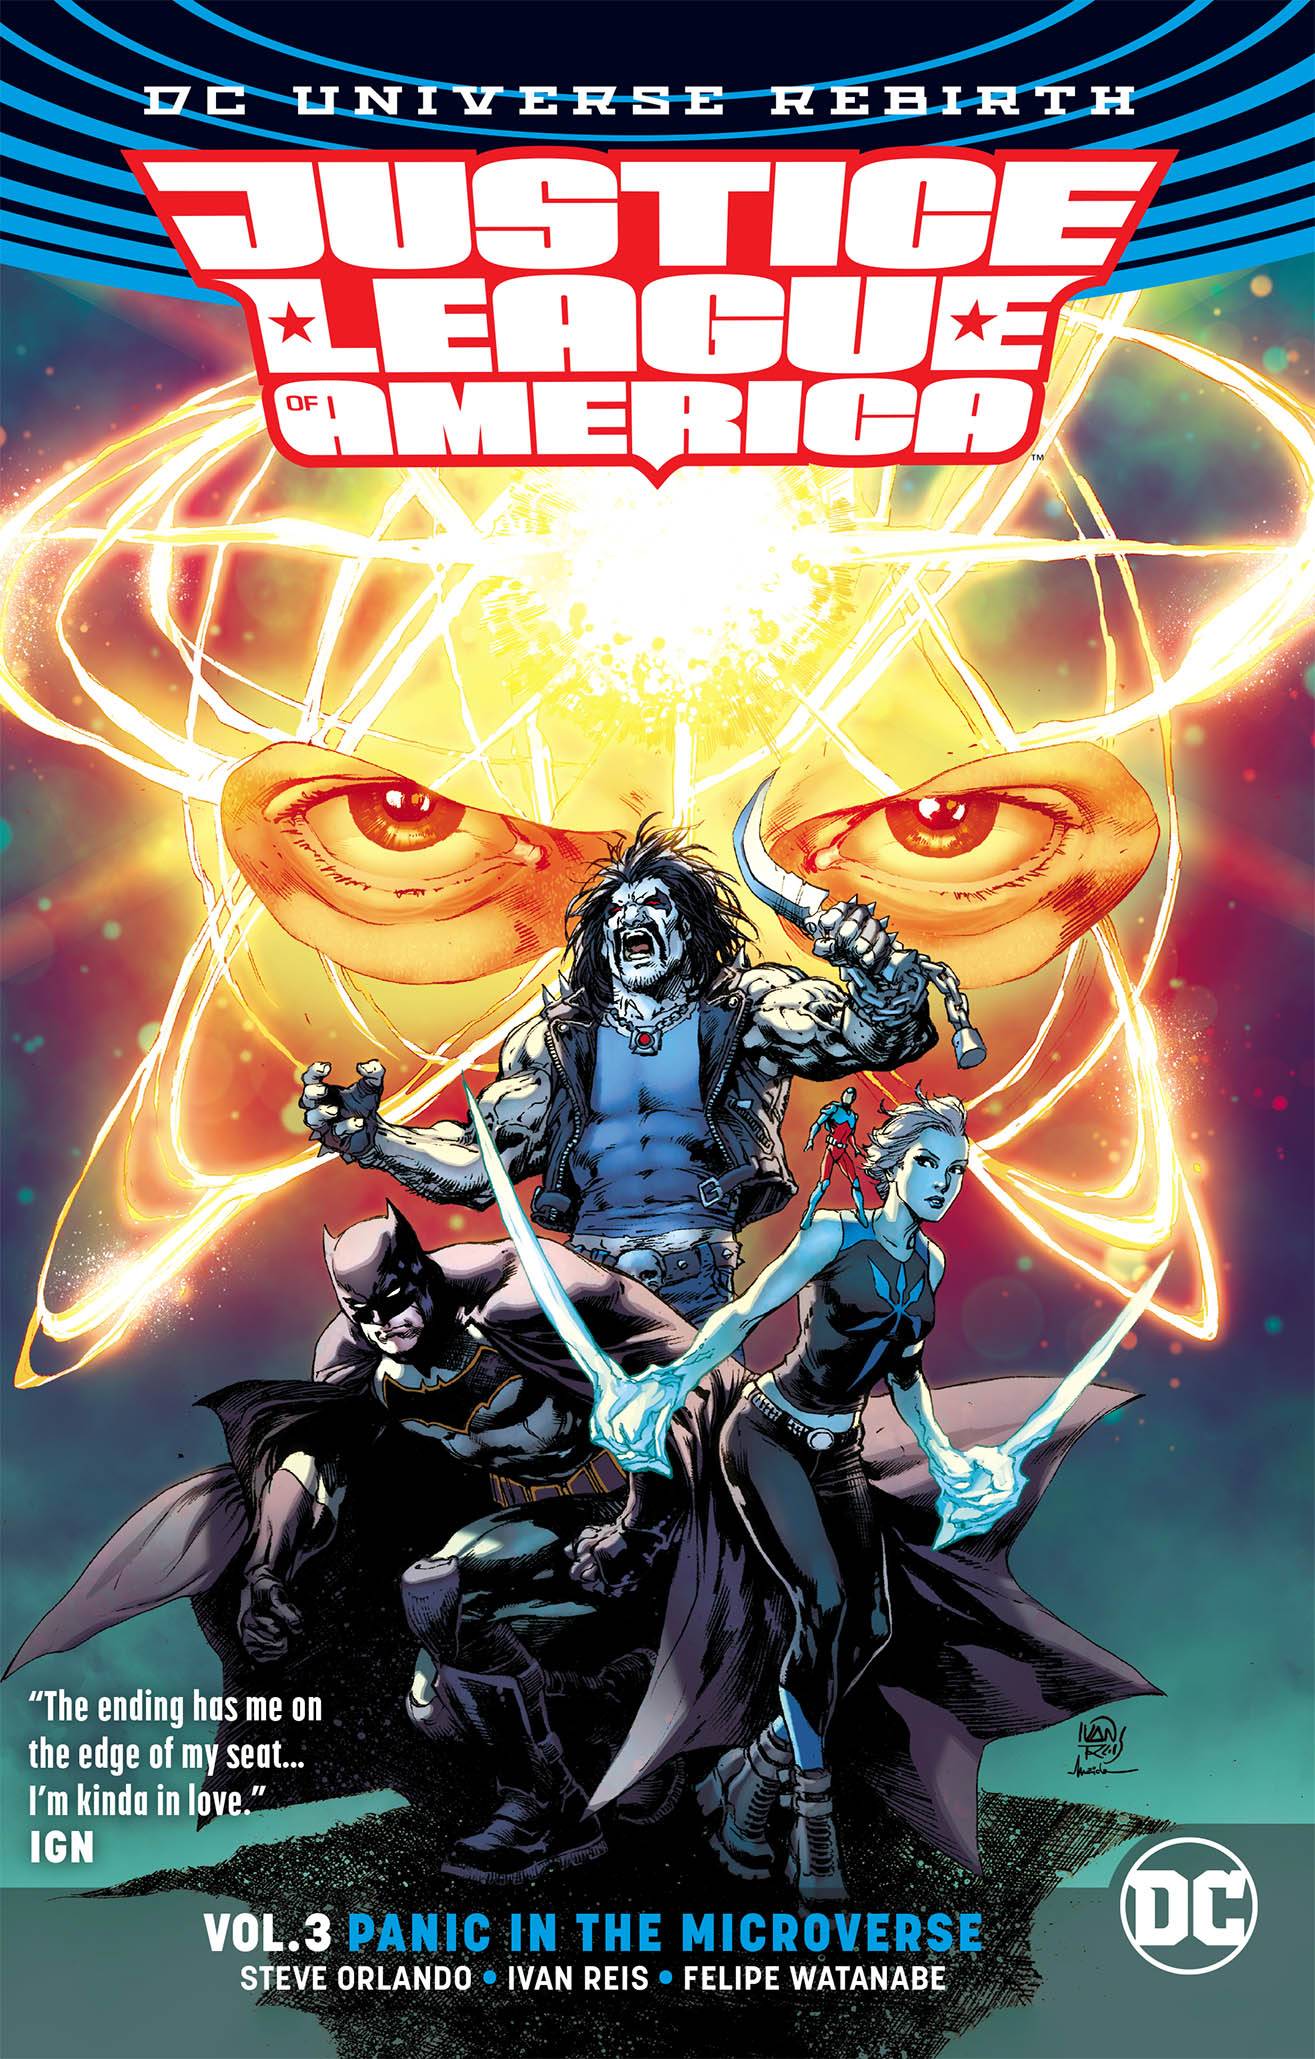 JUSTICE LEAGUE OF AMERICA (Rebirth) VOL 03: PANIC IN THE MICROVERSE